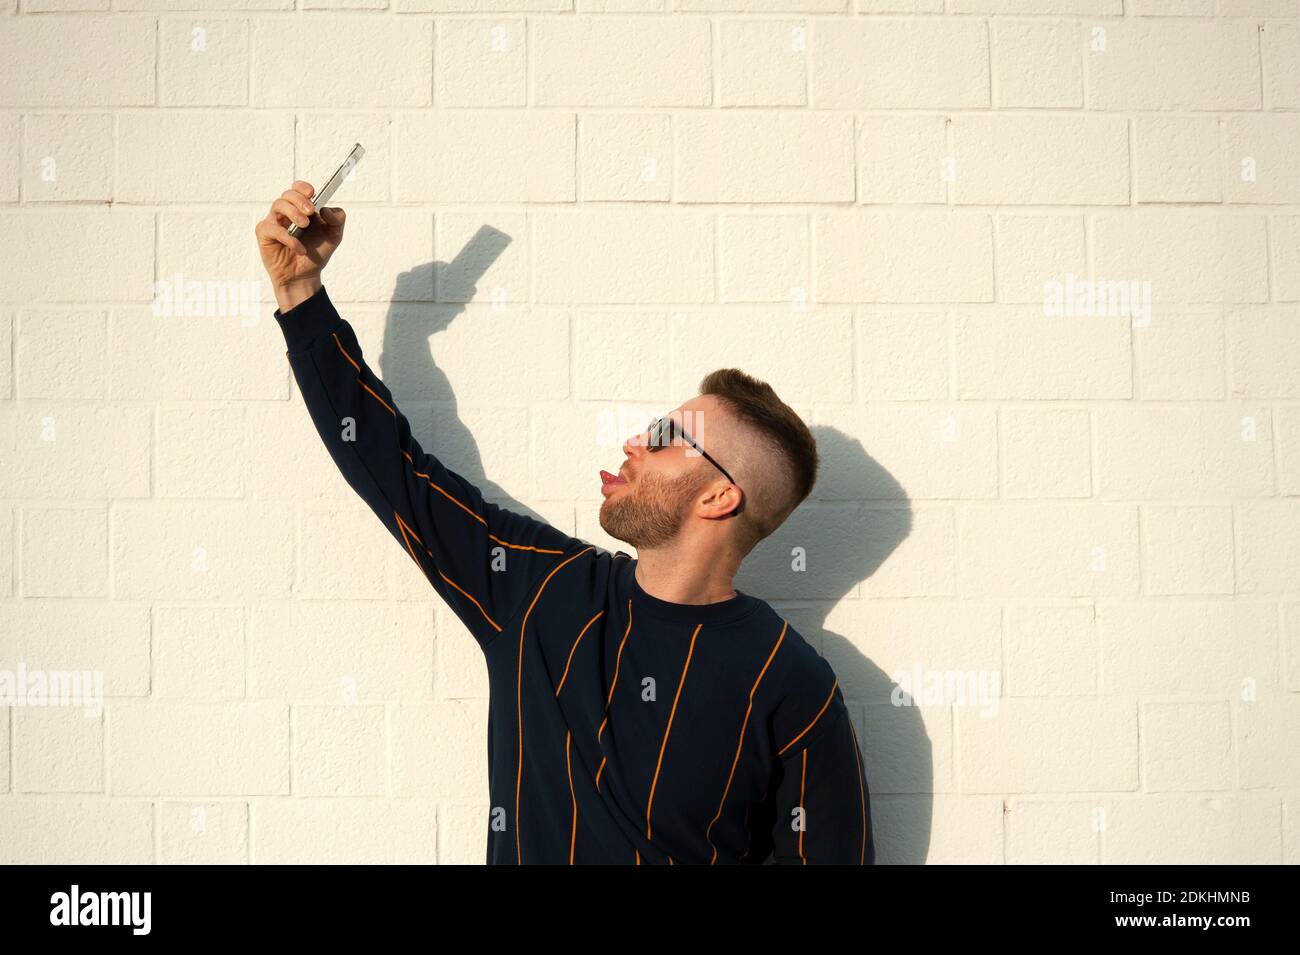 Positive smiling guy in casualwear showing tongue with mobile phone taking selfie. Young bearded man standing at outdoor white wall. Male selfie, leisure, fun concept. Stock Photo